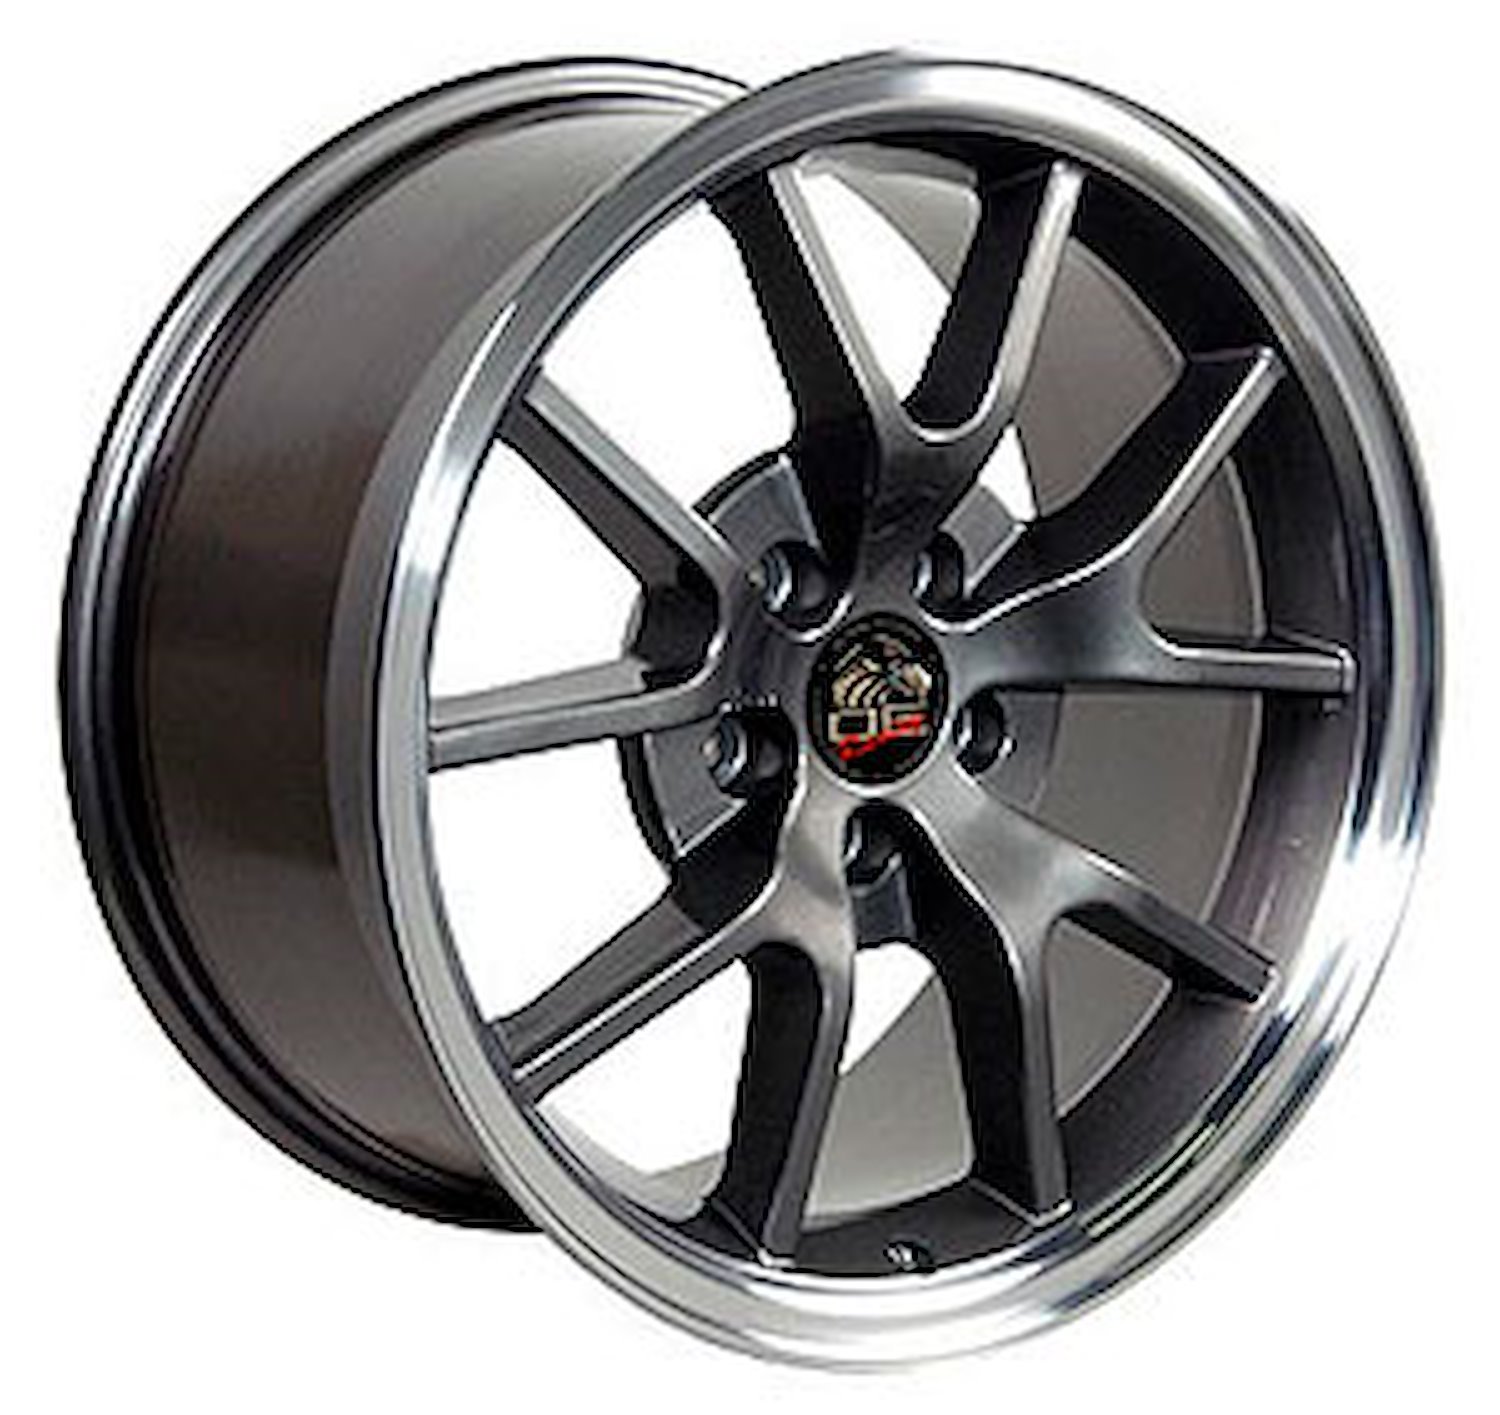 Mustang FR500 Style Wheel Size: 18" x 9" Bolt Pattern: 5 x 114.3 Rear Spacing: 5.94" Offset: +24mm